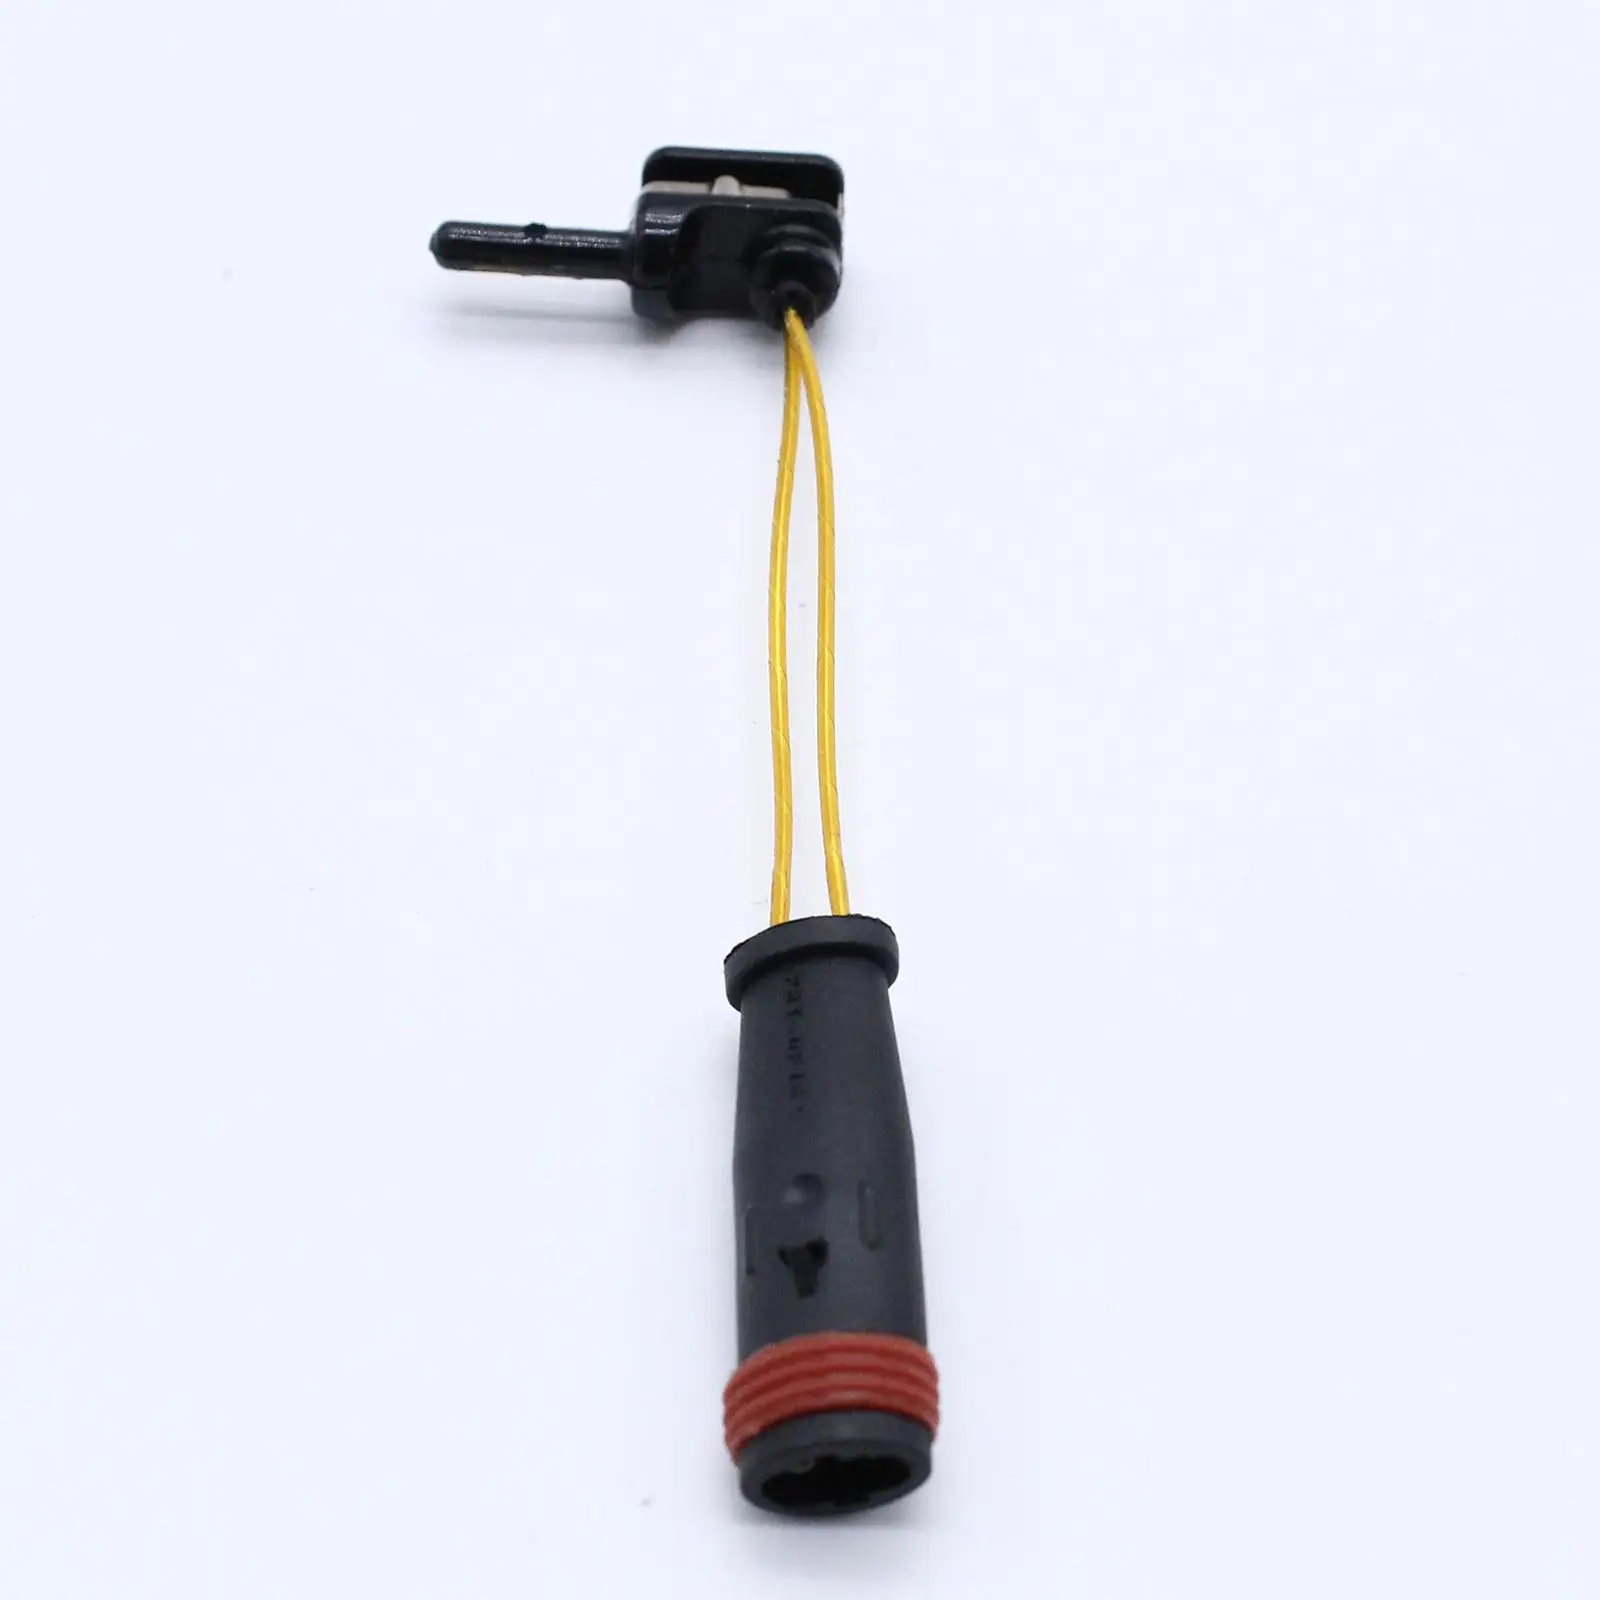 Car 2115401717 Brake Pad Wear Sensor Front Rear Fit for W203 W204 W211 CLK  High Performance Premium Professional Replaces